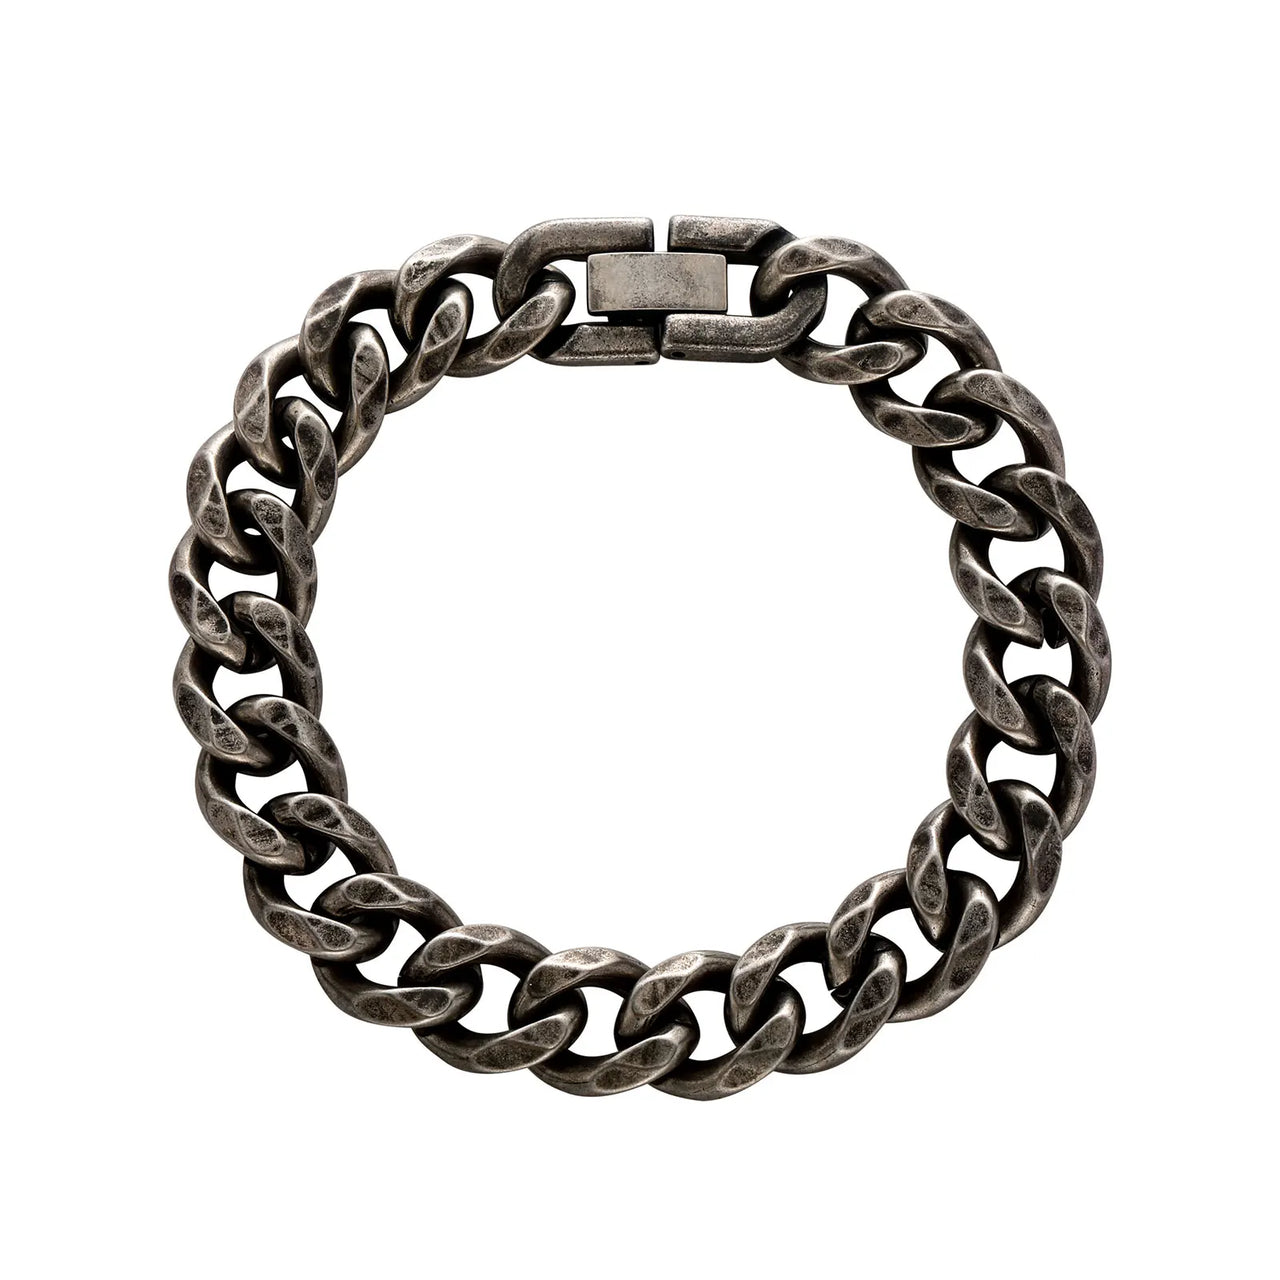 11mm Distressed Brushed Miami Cuban Link Bracelet - Different Drips